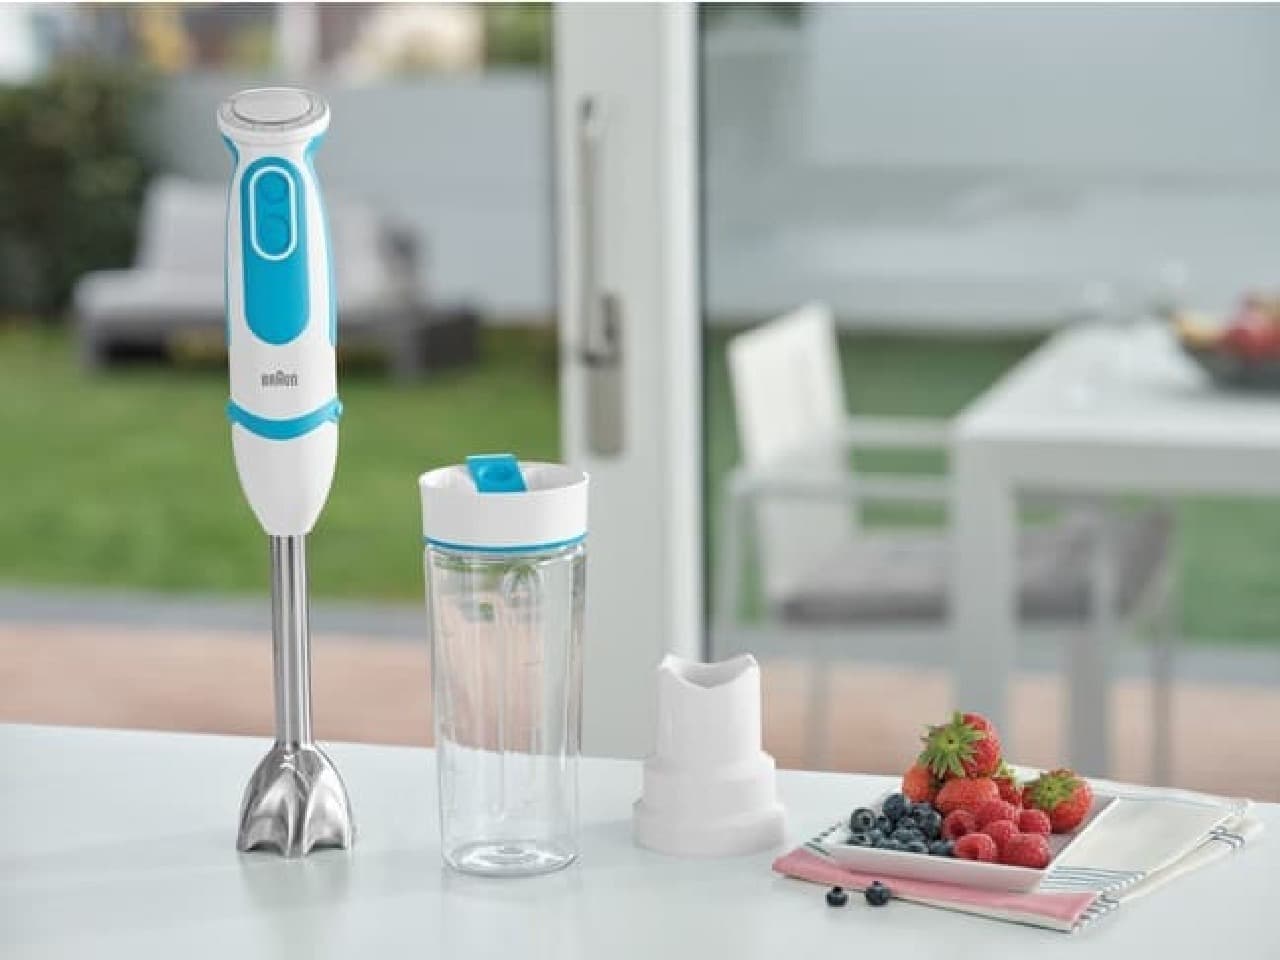 Braun Multiquick 5 Vario Fit Hand Blender MQ5051 released -- smoothies in  about 1 minute & easy to carry []